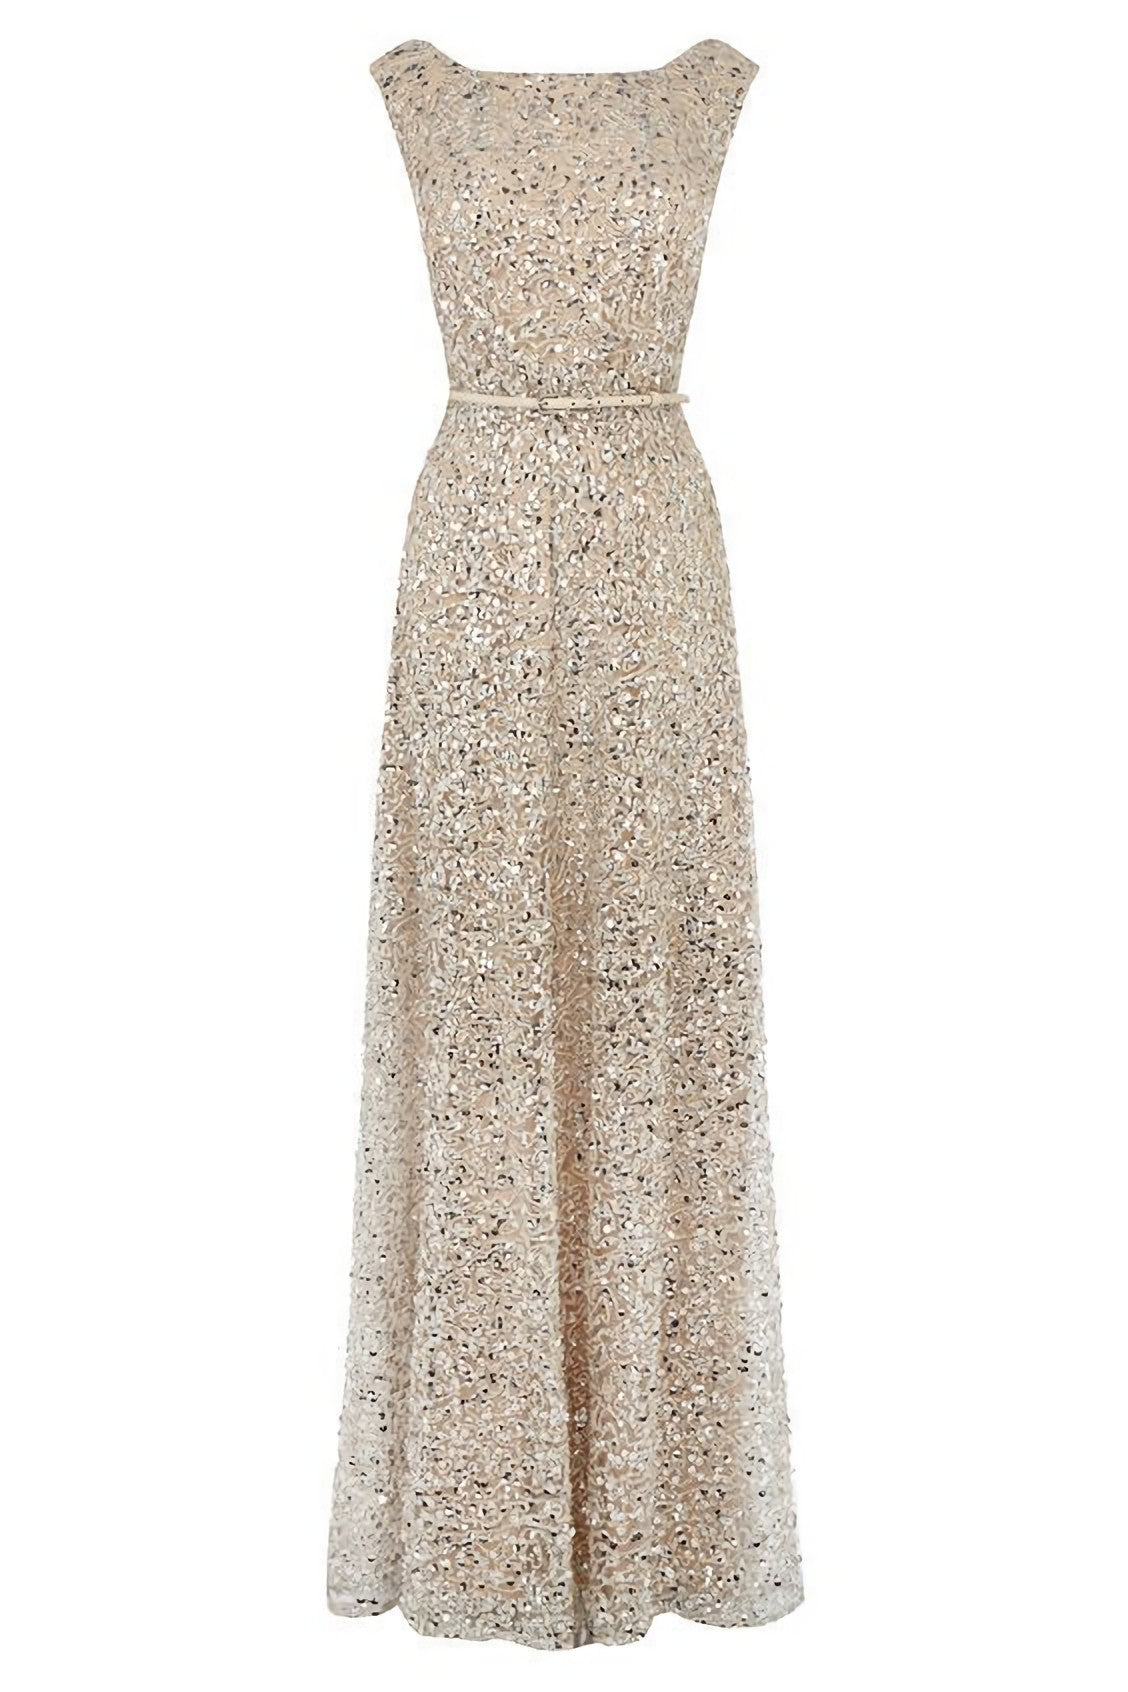 Prom Dresses Affordable, Gorgeous Sequin Prom Evening Gown